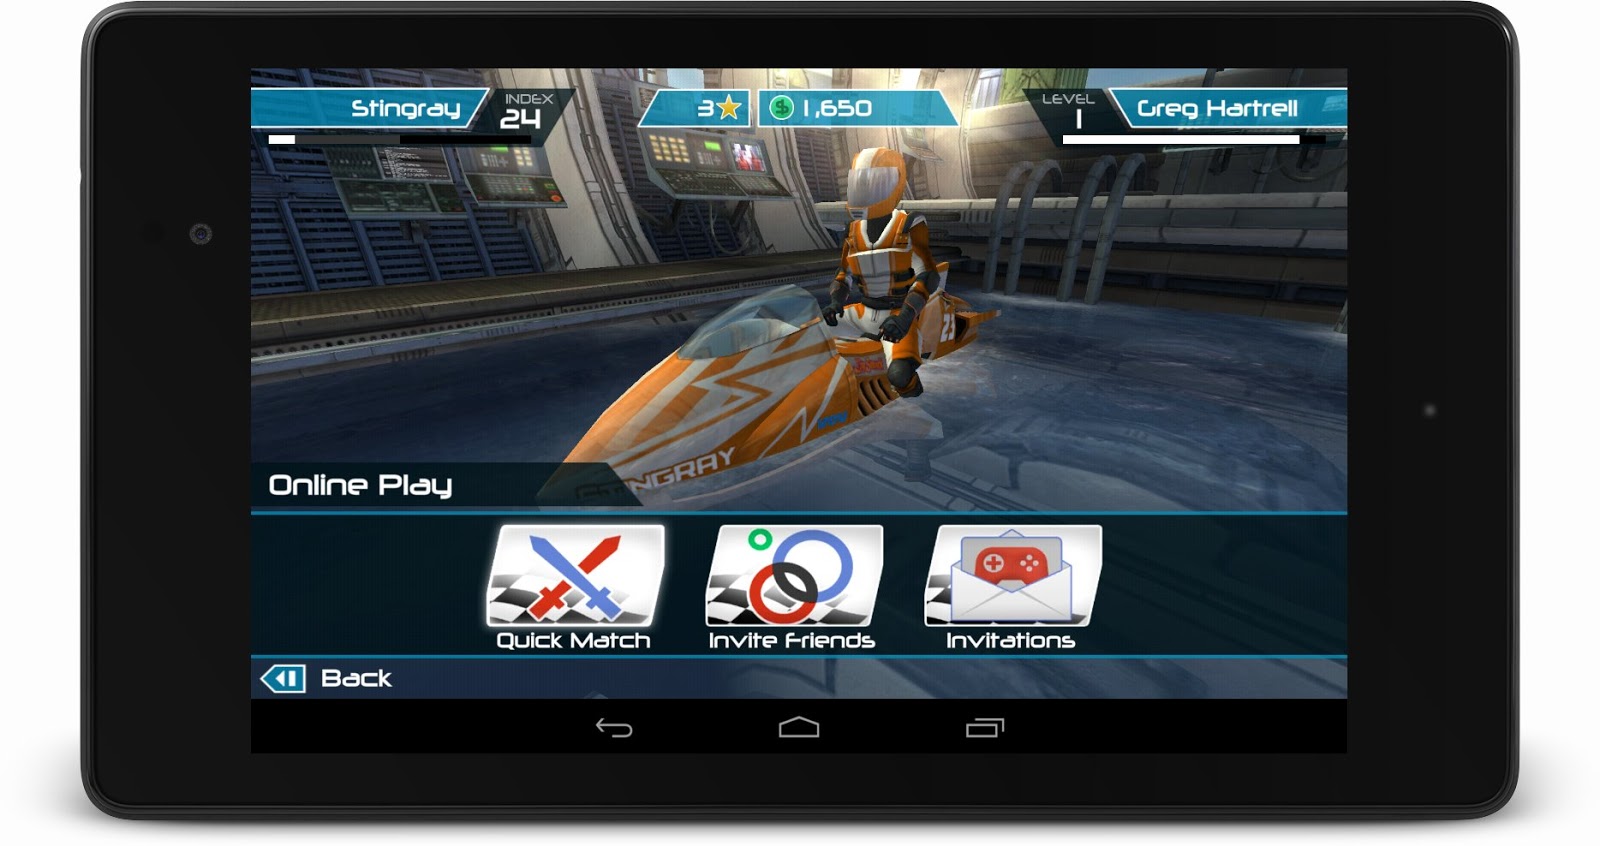 Friends Racing - Apps on Google Play